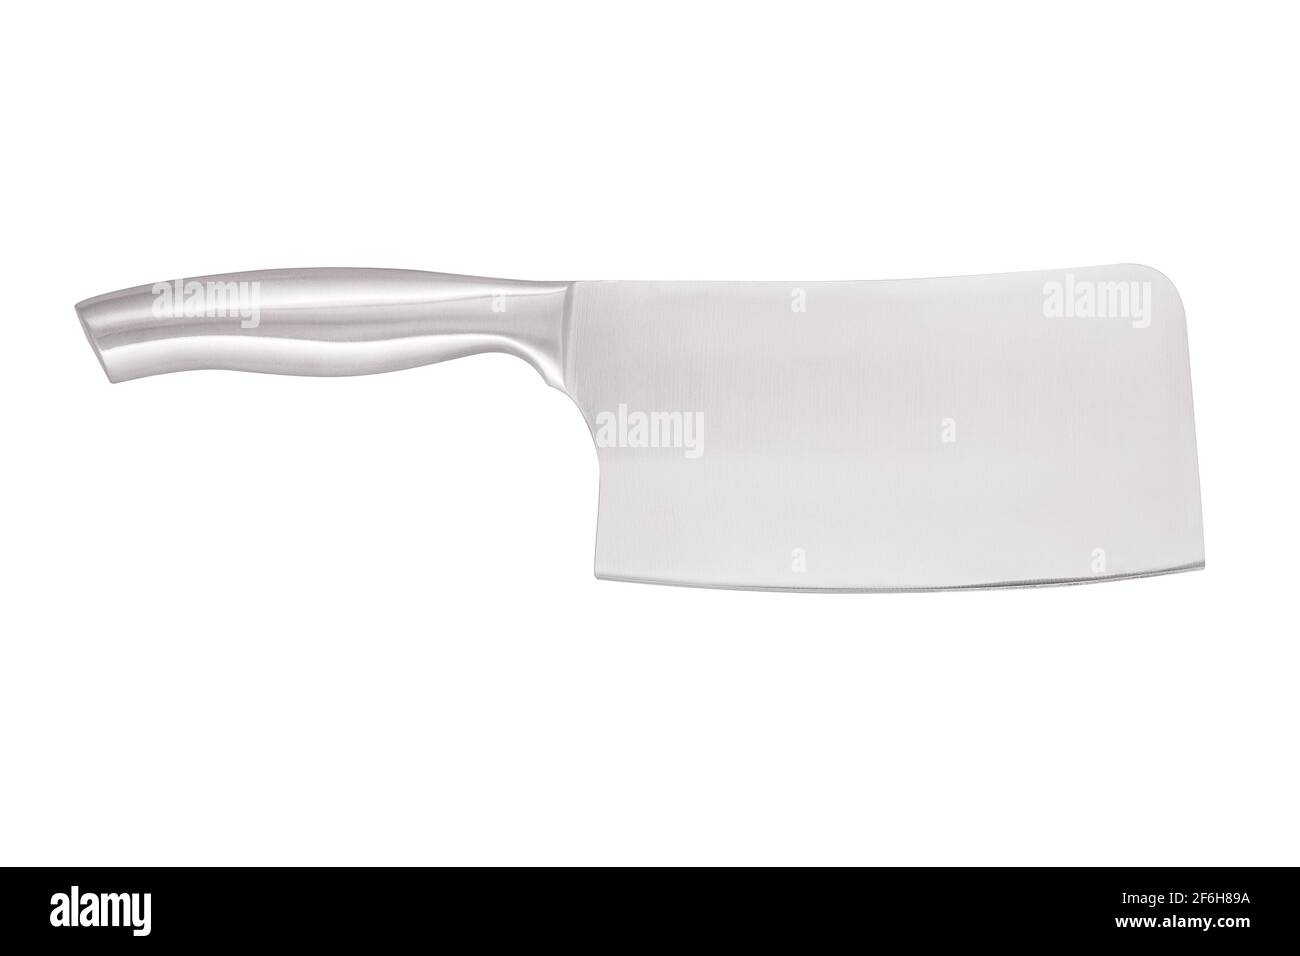 Stainless steel kitchen knife for chopping meat. Butcher's knife isolated on white background. Stock Photo